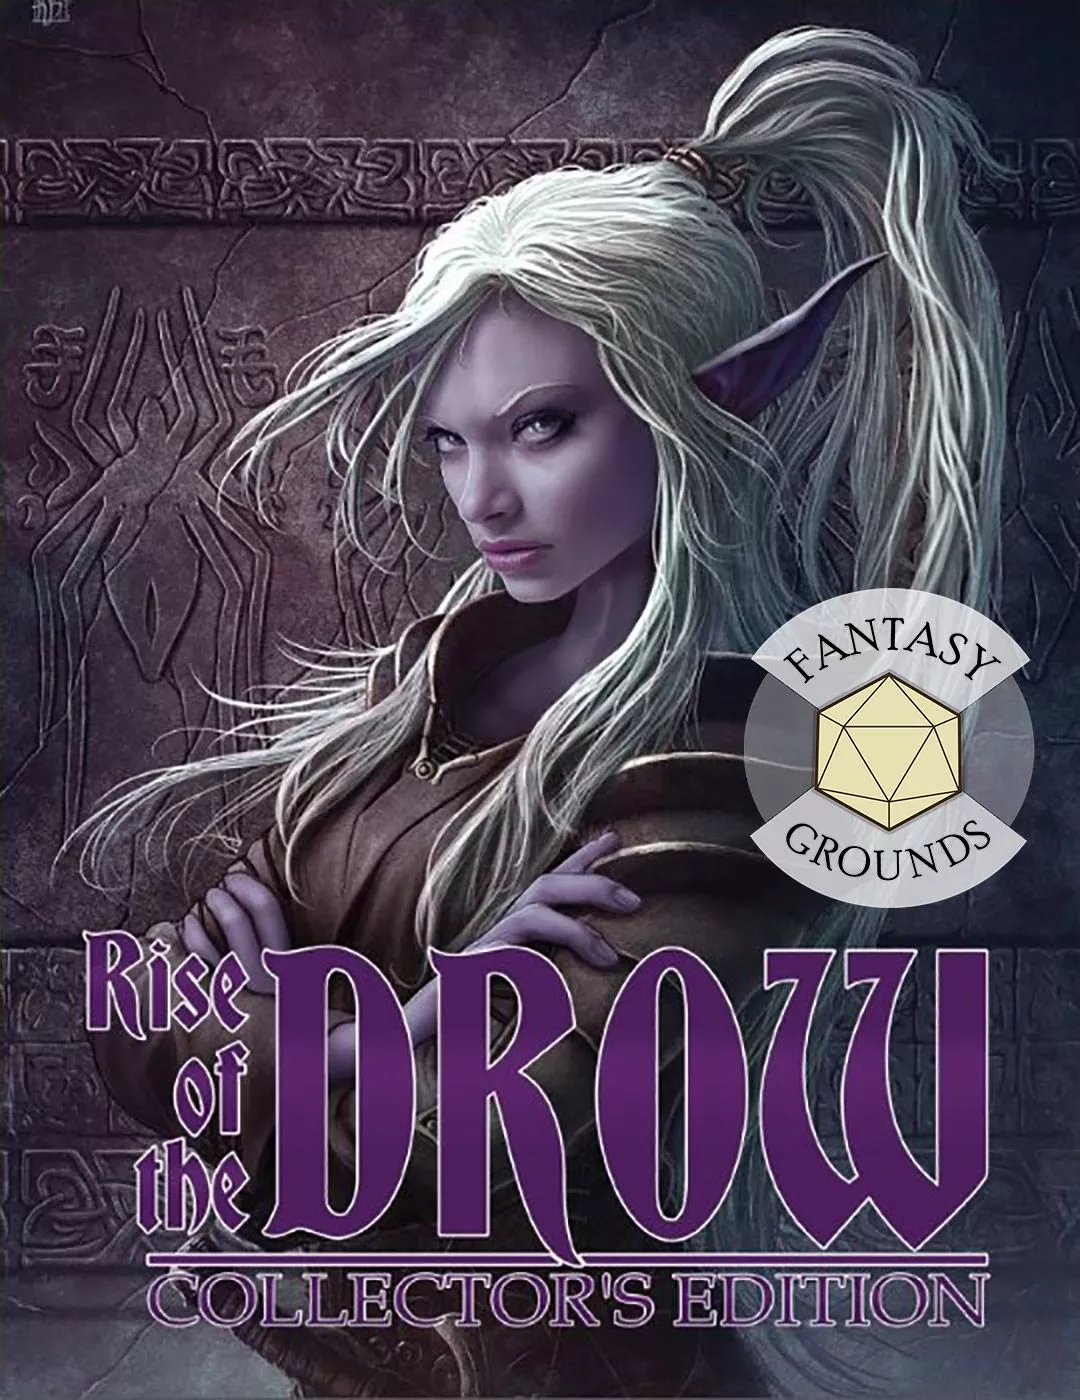 Rise of the Drow: Collectors Edition for Fantasy Grounds